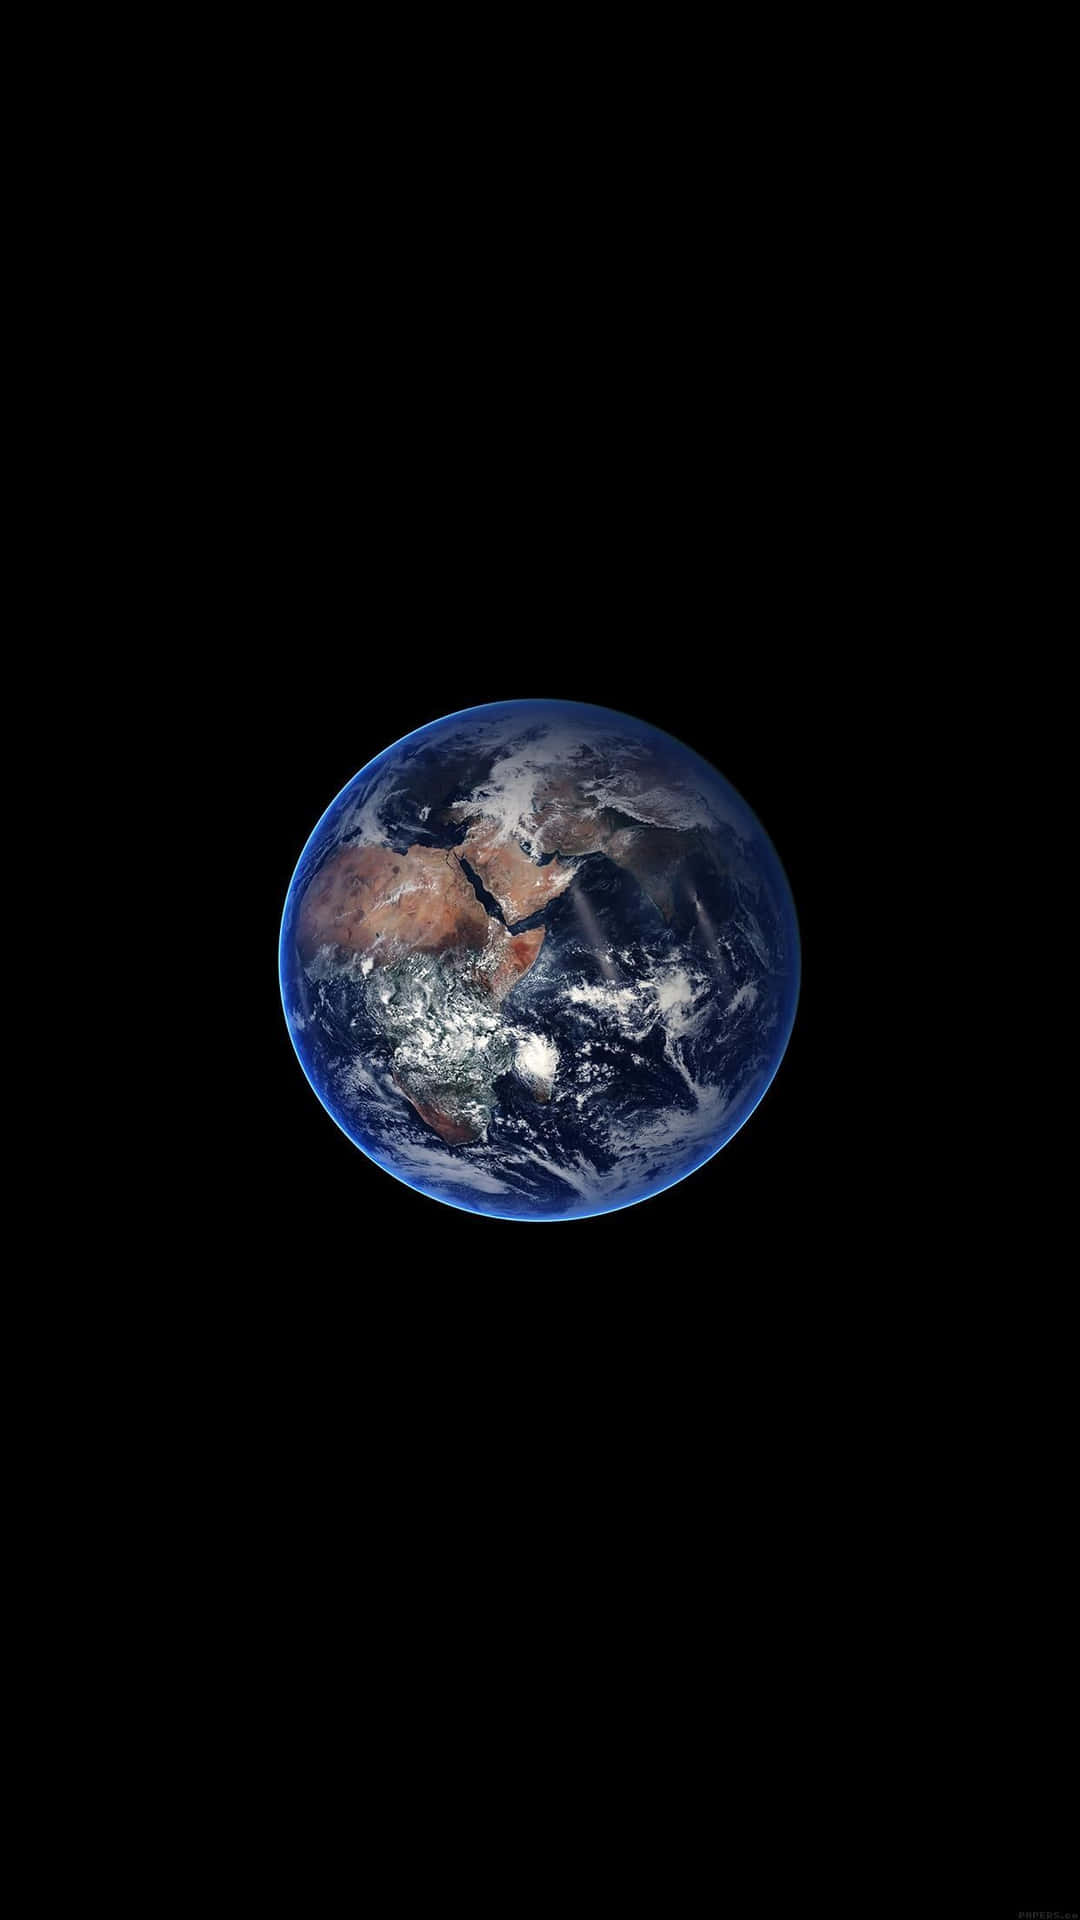 IPhone Earth Planet In The Outer Space Wallpaper